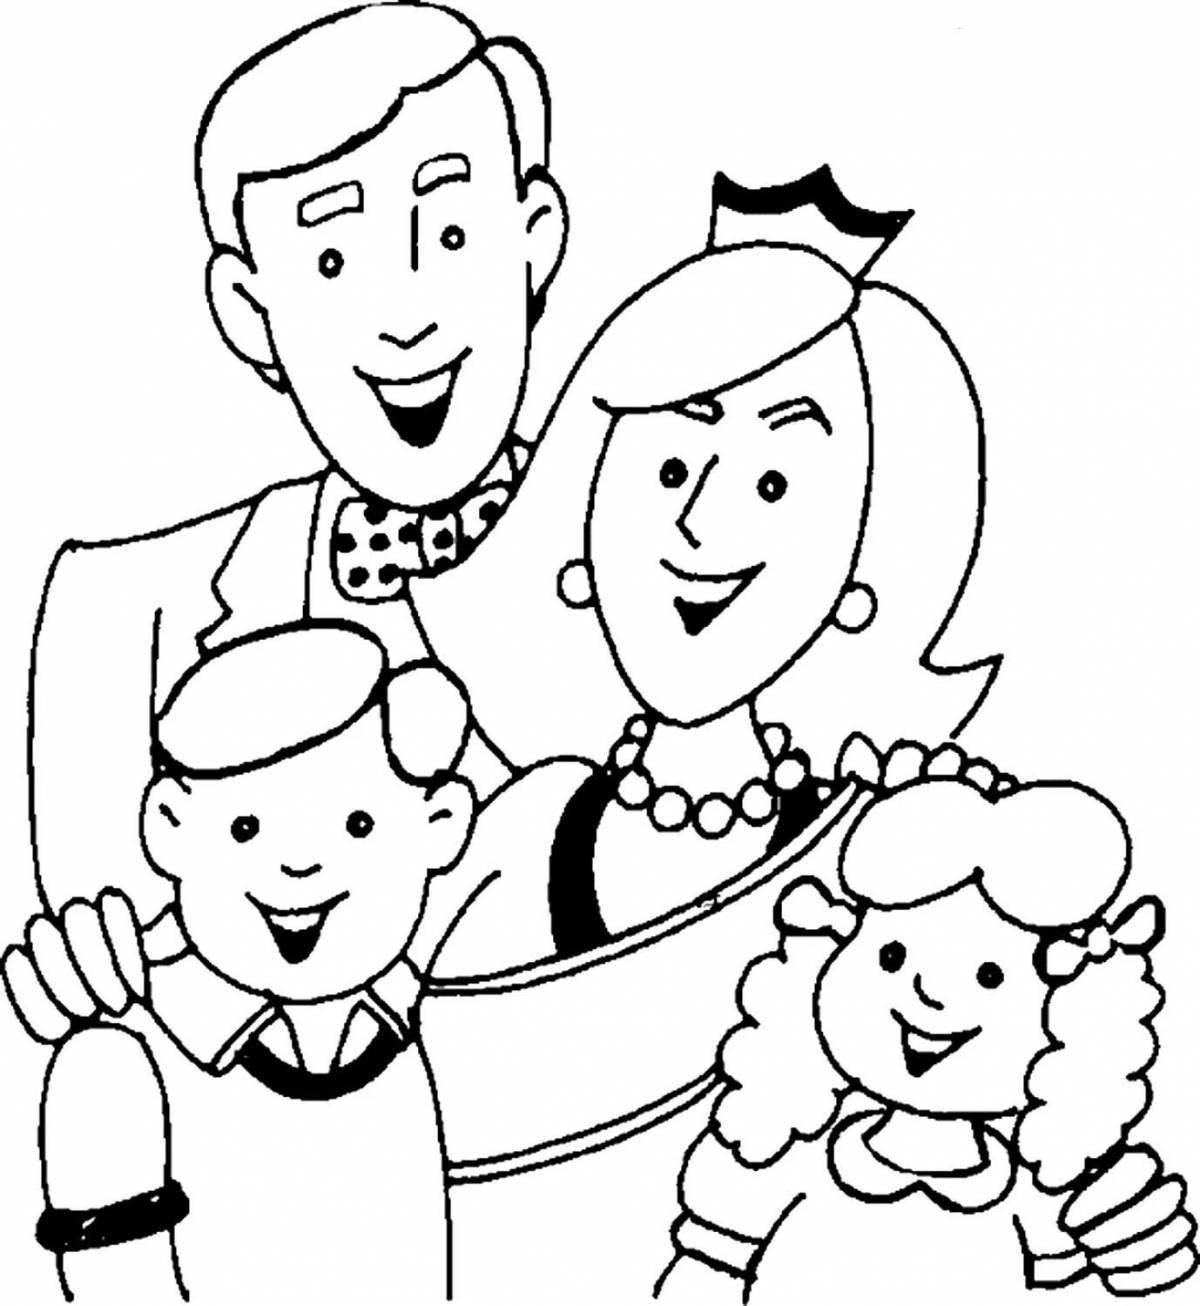 Playful coloring page my family